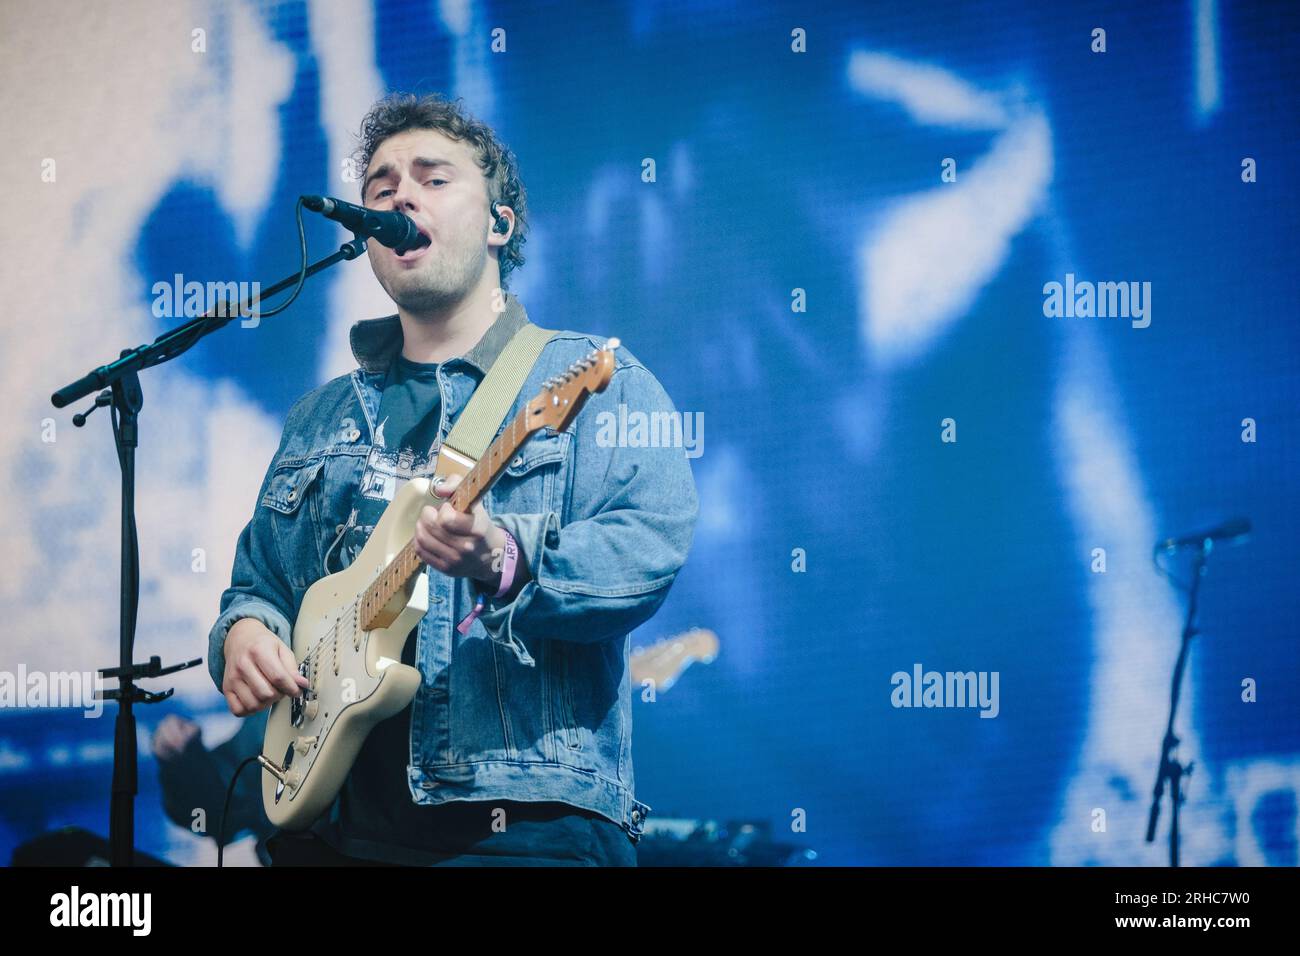 Gothenburg, Sweden. 12th, August 2023. The English singer, songwriter and musician Sam Fender performs a live concert during the Swedish music festival Way Out West 2023 in Gothenburg. (Photo credit: Gonzales Photo - Tilman Jentzsch). Stock Photo